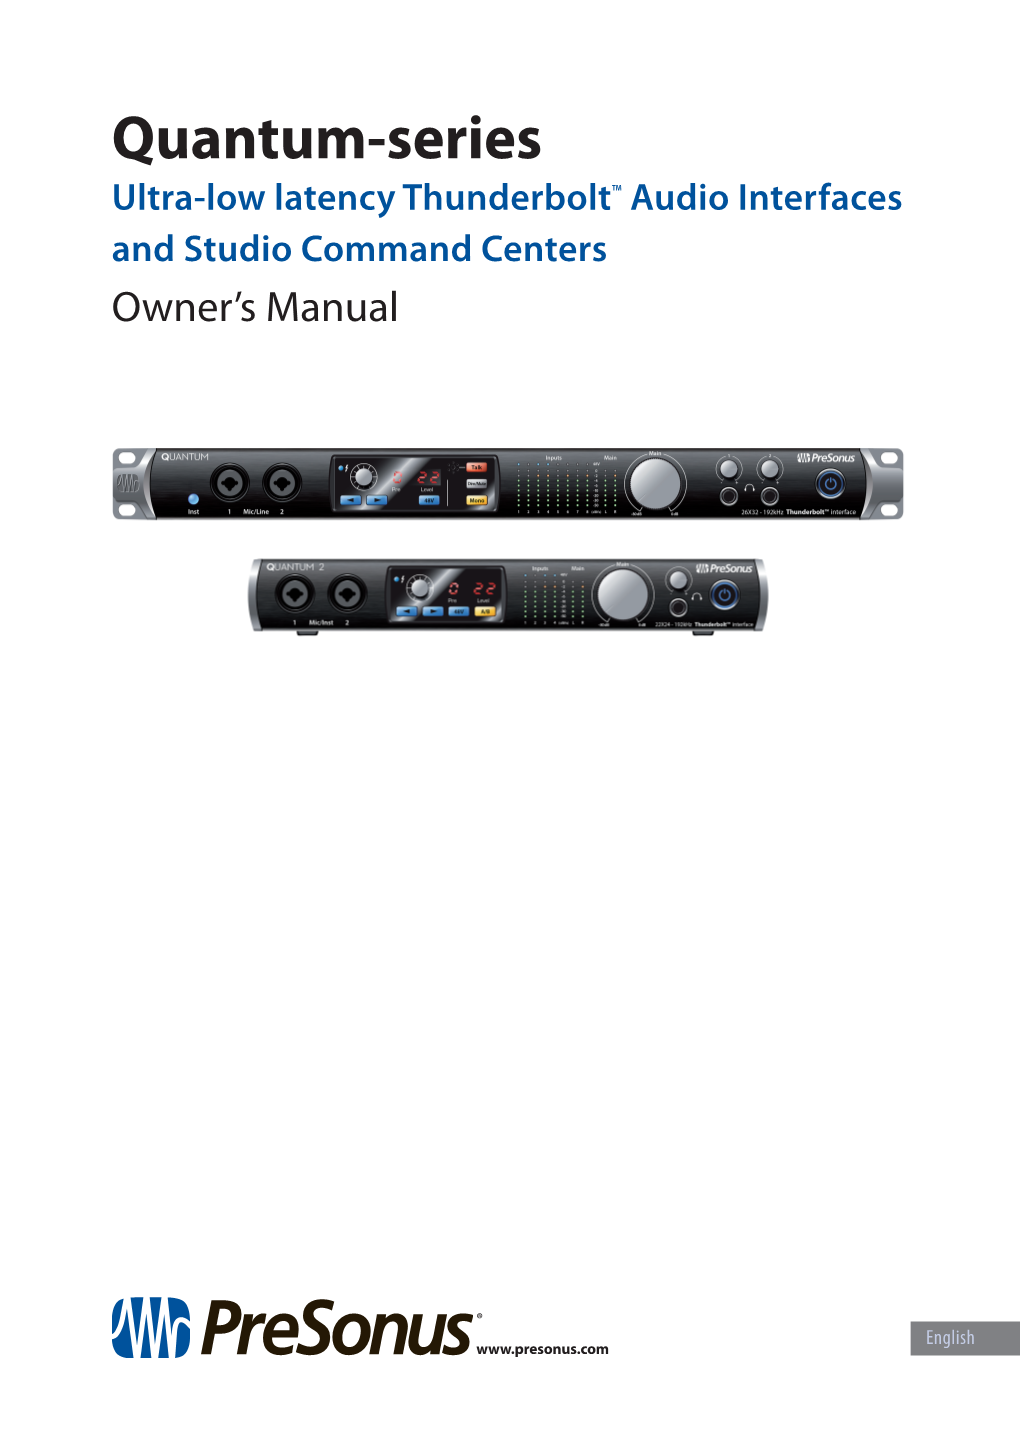 Quantum-Series Ultra-Low Latency Thunderbolt™ Audio Interfaces and Studio Command Centers Owner’S Manual